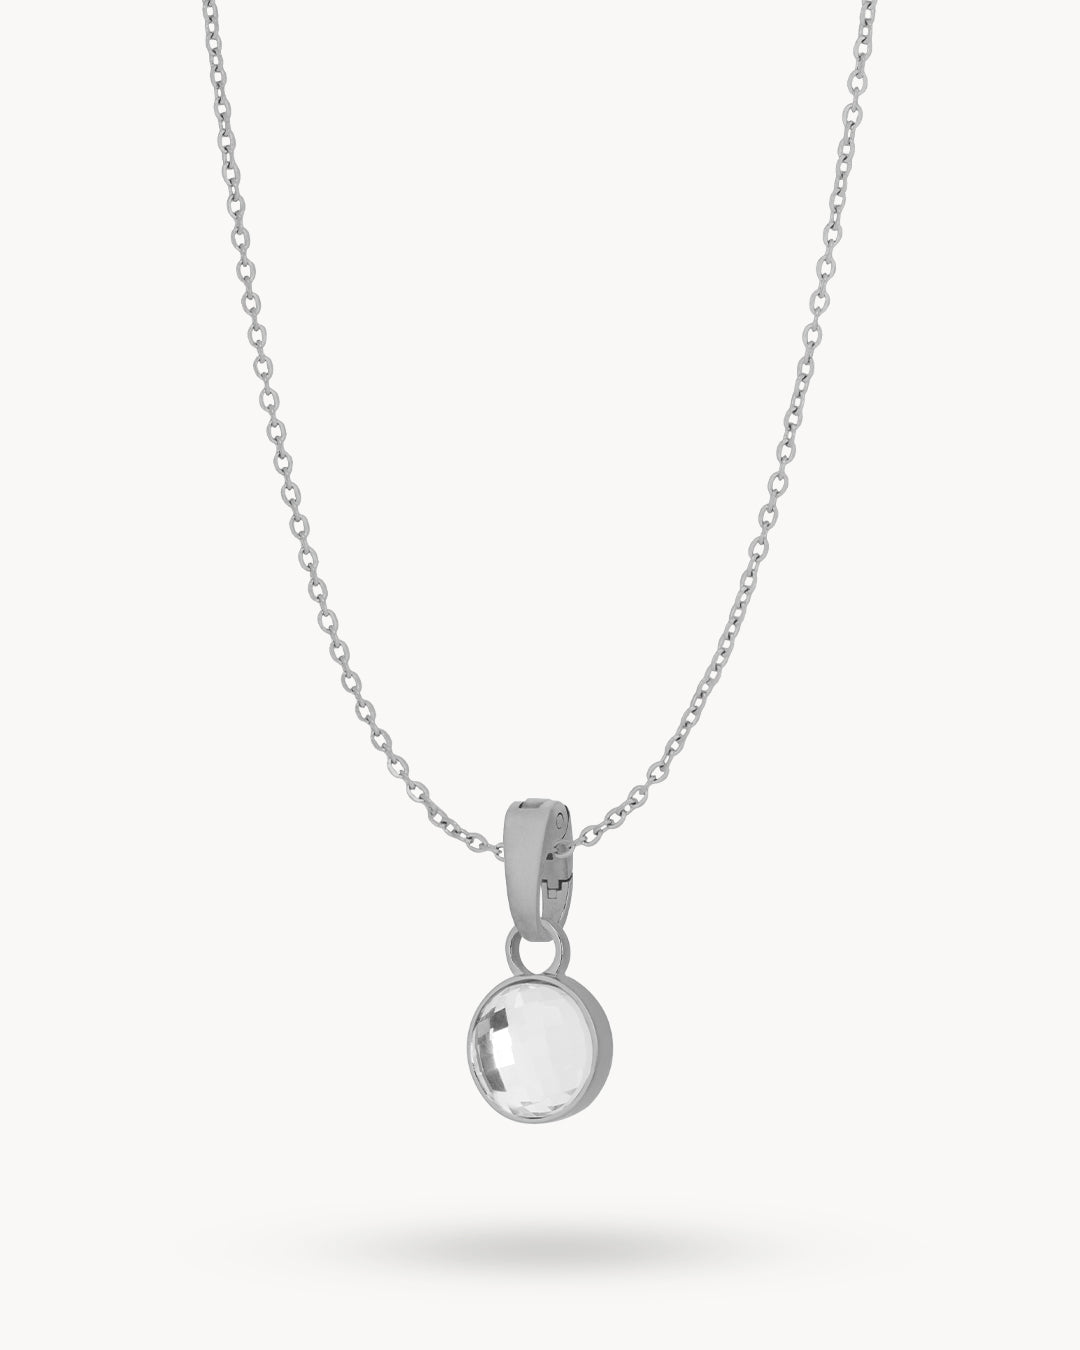 April Hope Dainty Signature Birthstone Necklace Set, Silver